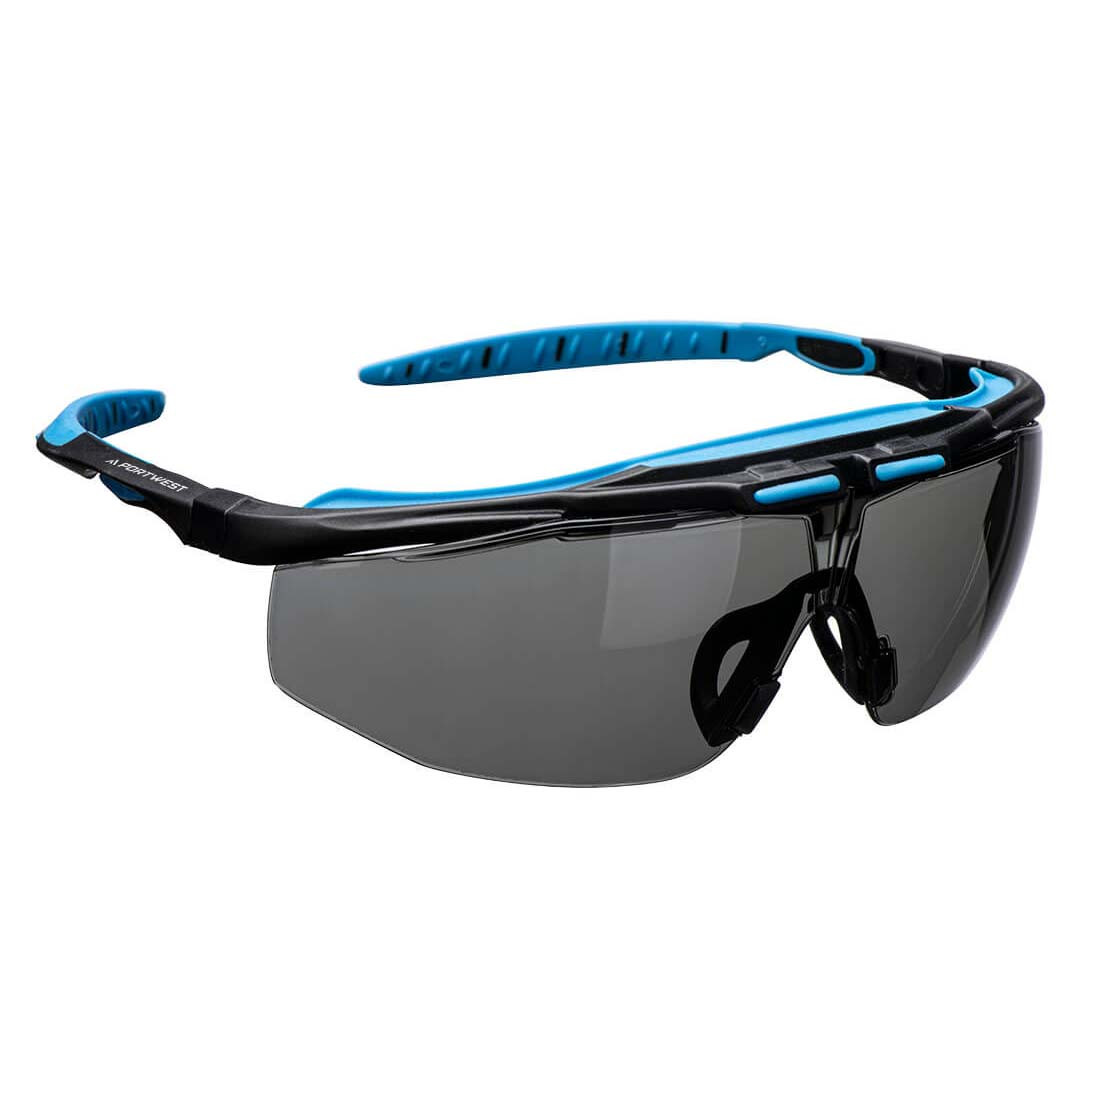 Peak KN Safety Glasses - Personal protection